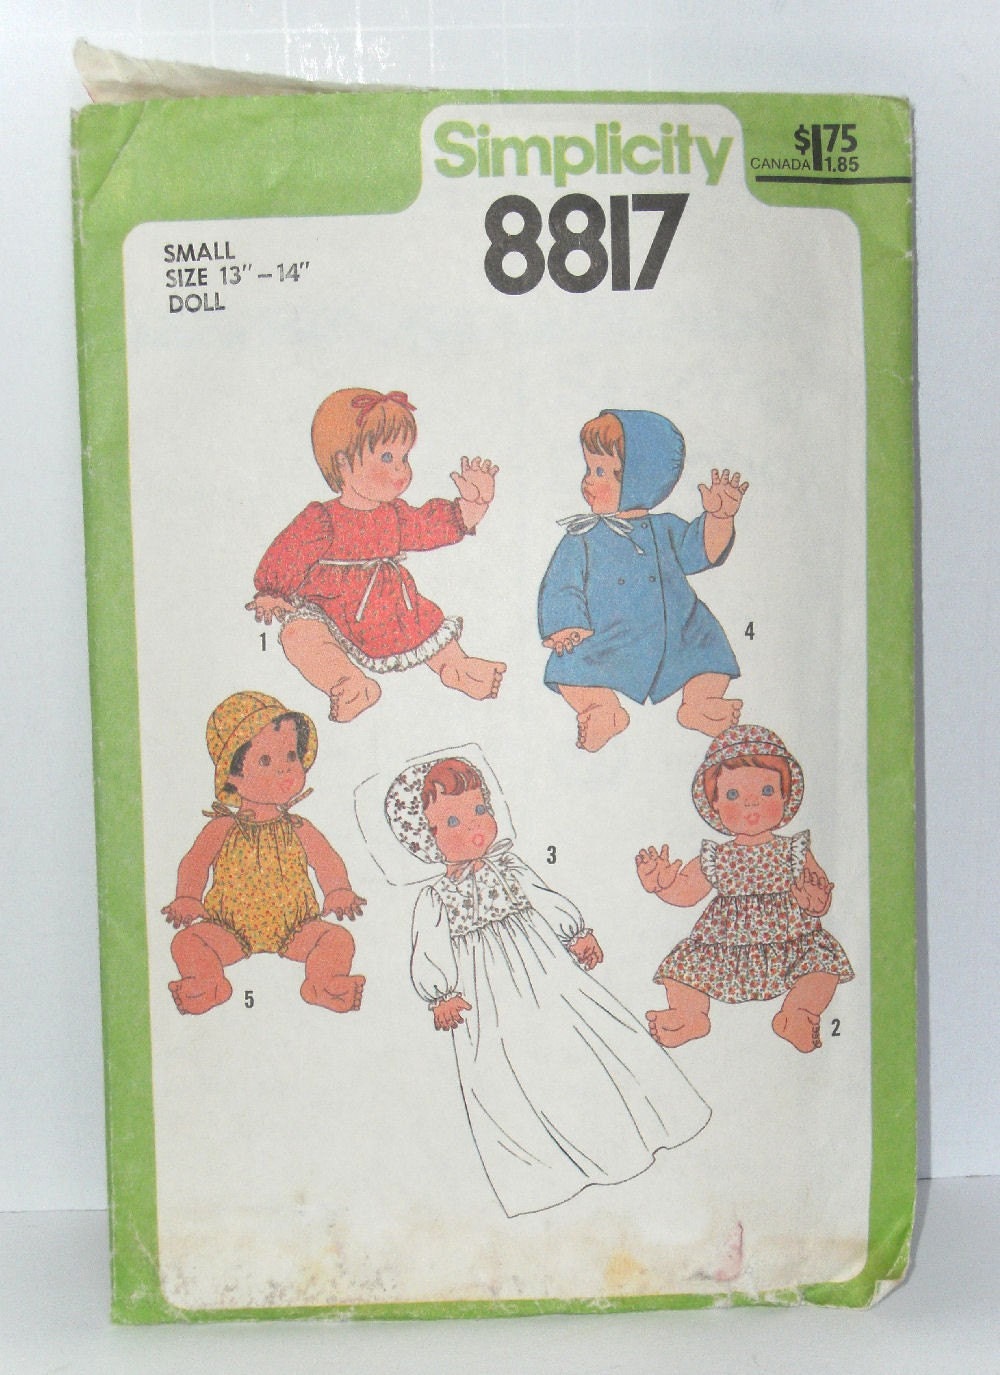 Vintage Sewing Pattern - Wardrobe for Baby Dolls in Three Sizes